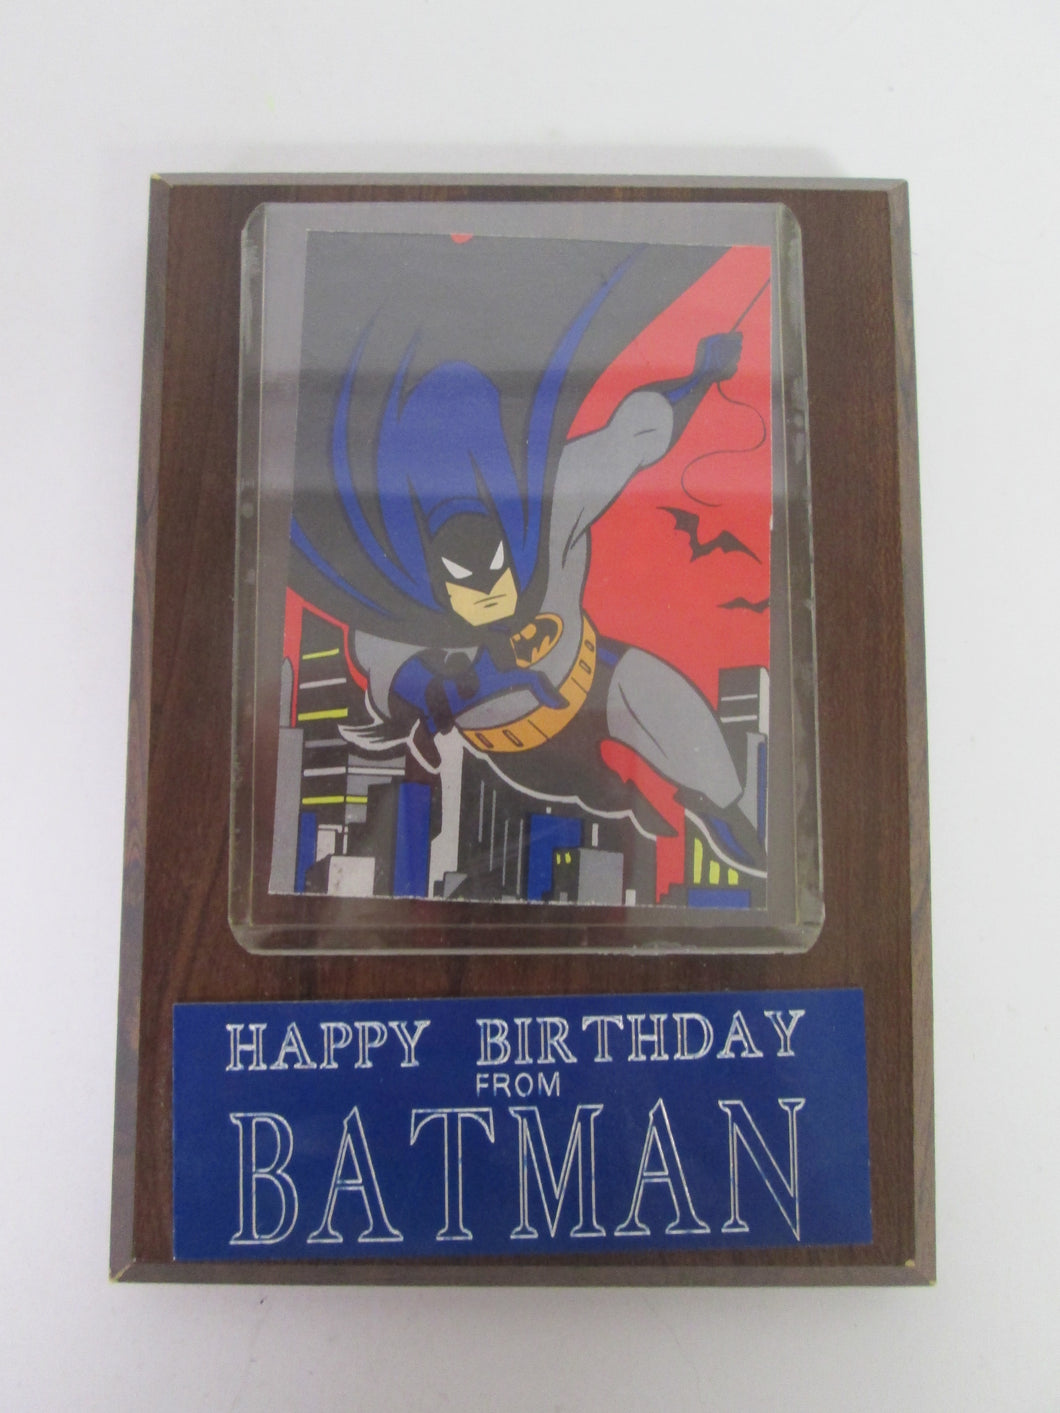 Happy Birthday from Batman Wall Plaque Card Holder with engraved plaque and Batman Card